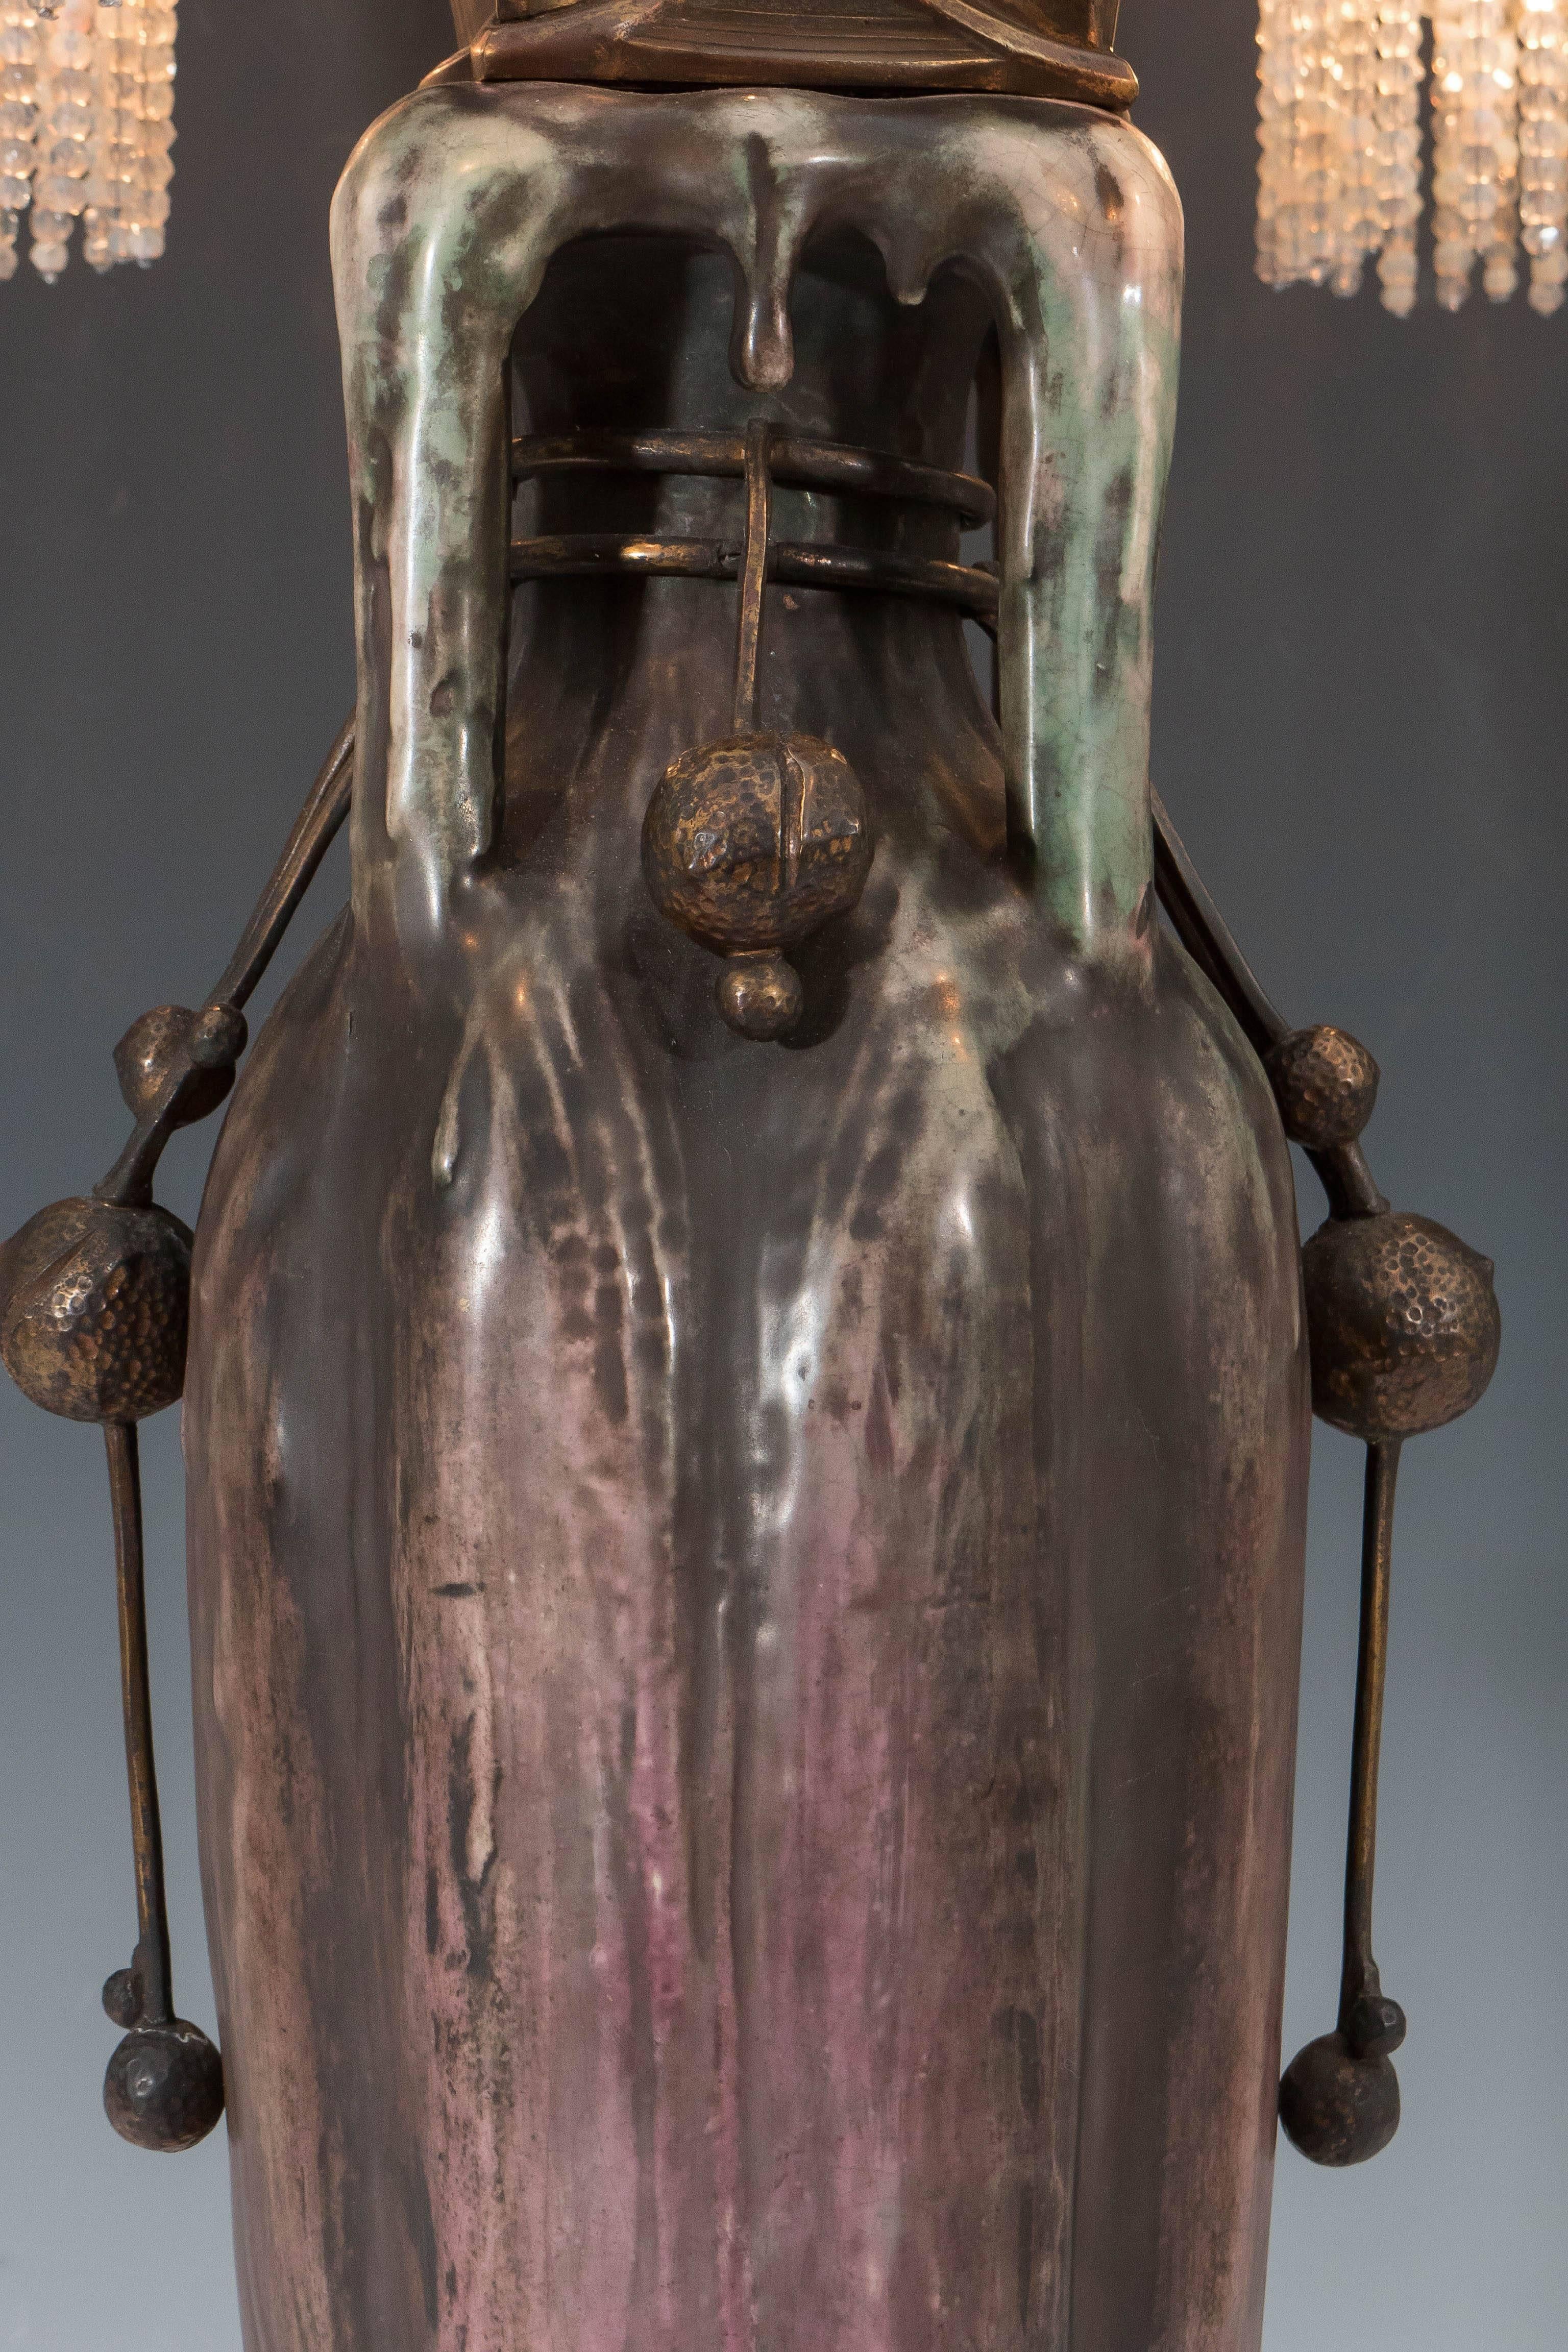 This stunning Austrian Art Nouveau lamp includes a EDDA series pottery vase by Amphora as base, mounted with cast and handmade bronze elements, trimmed with glass and crystal beads. Dated 1901, the highly organic vase design was exhibited in the